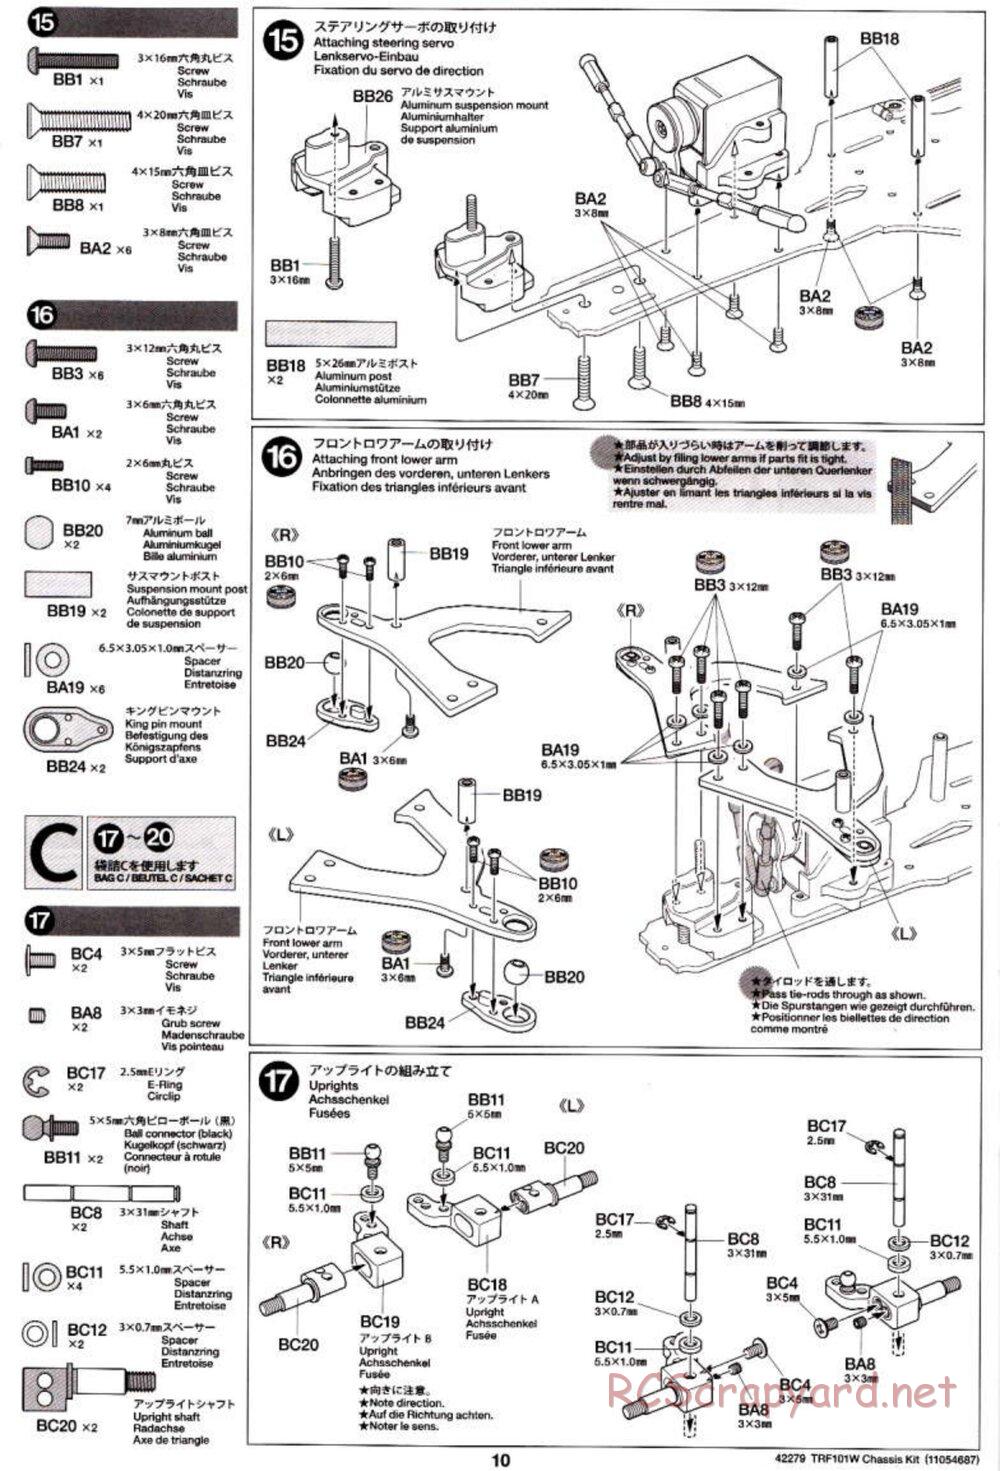 Tamiya - TRF101W Chassis Chassis - Manual - Page 10